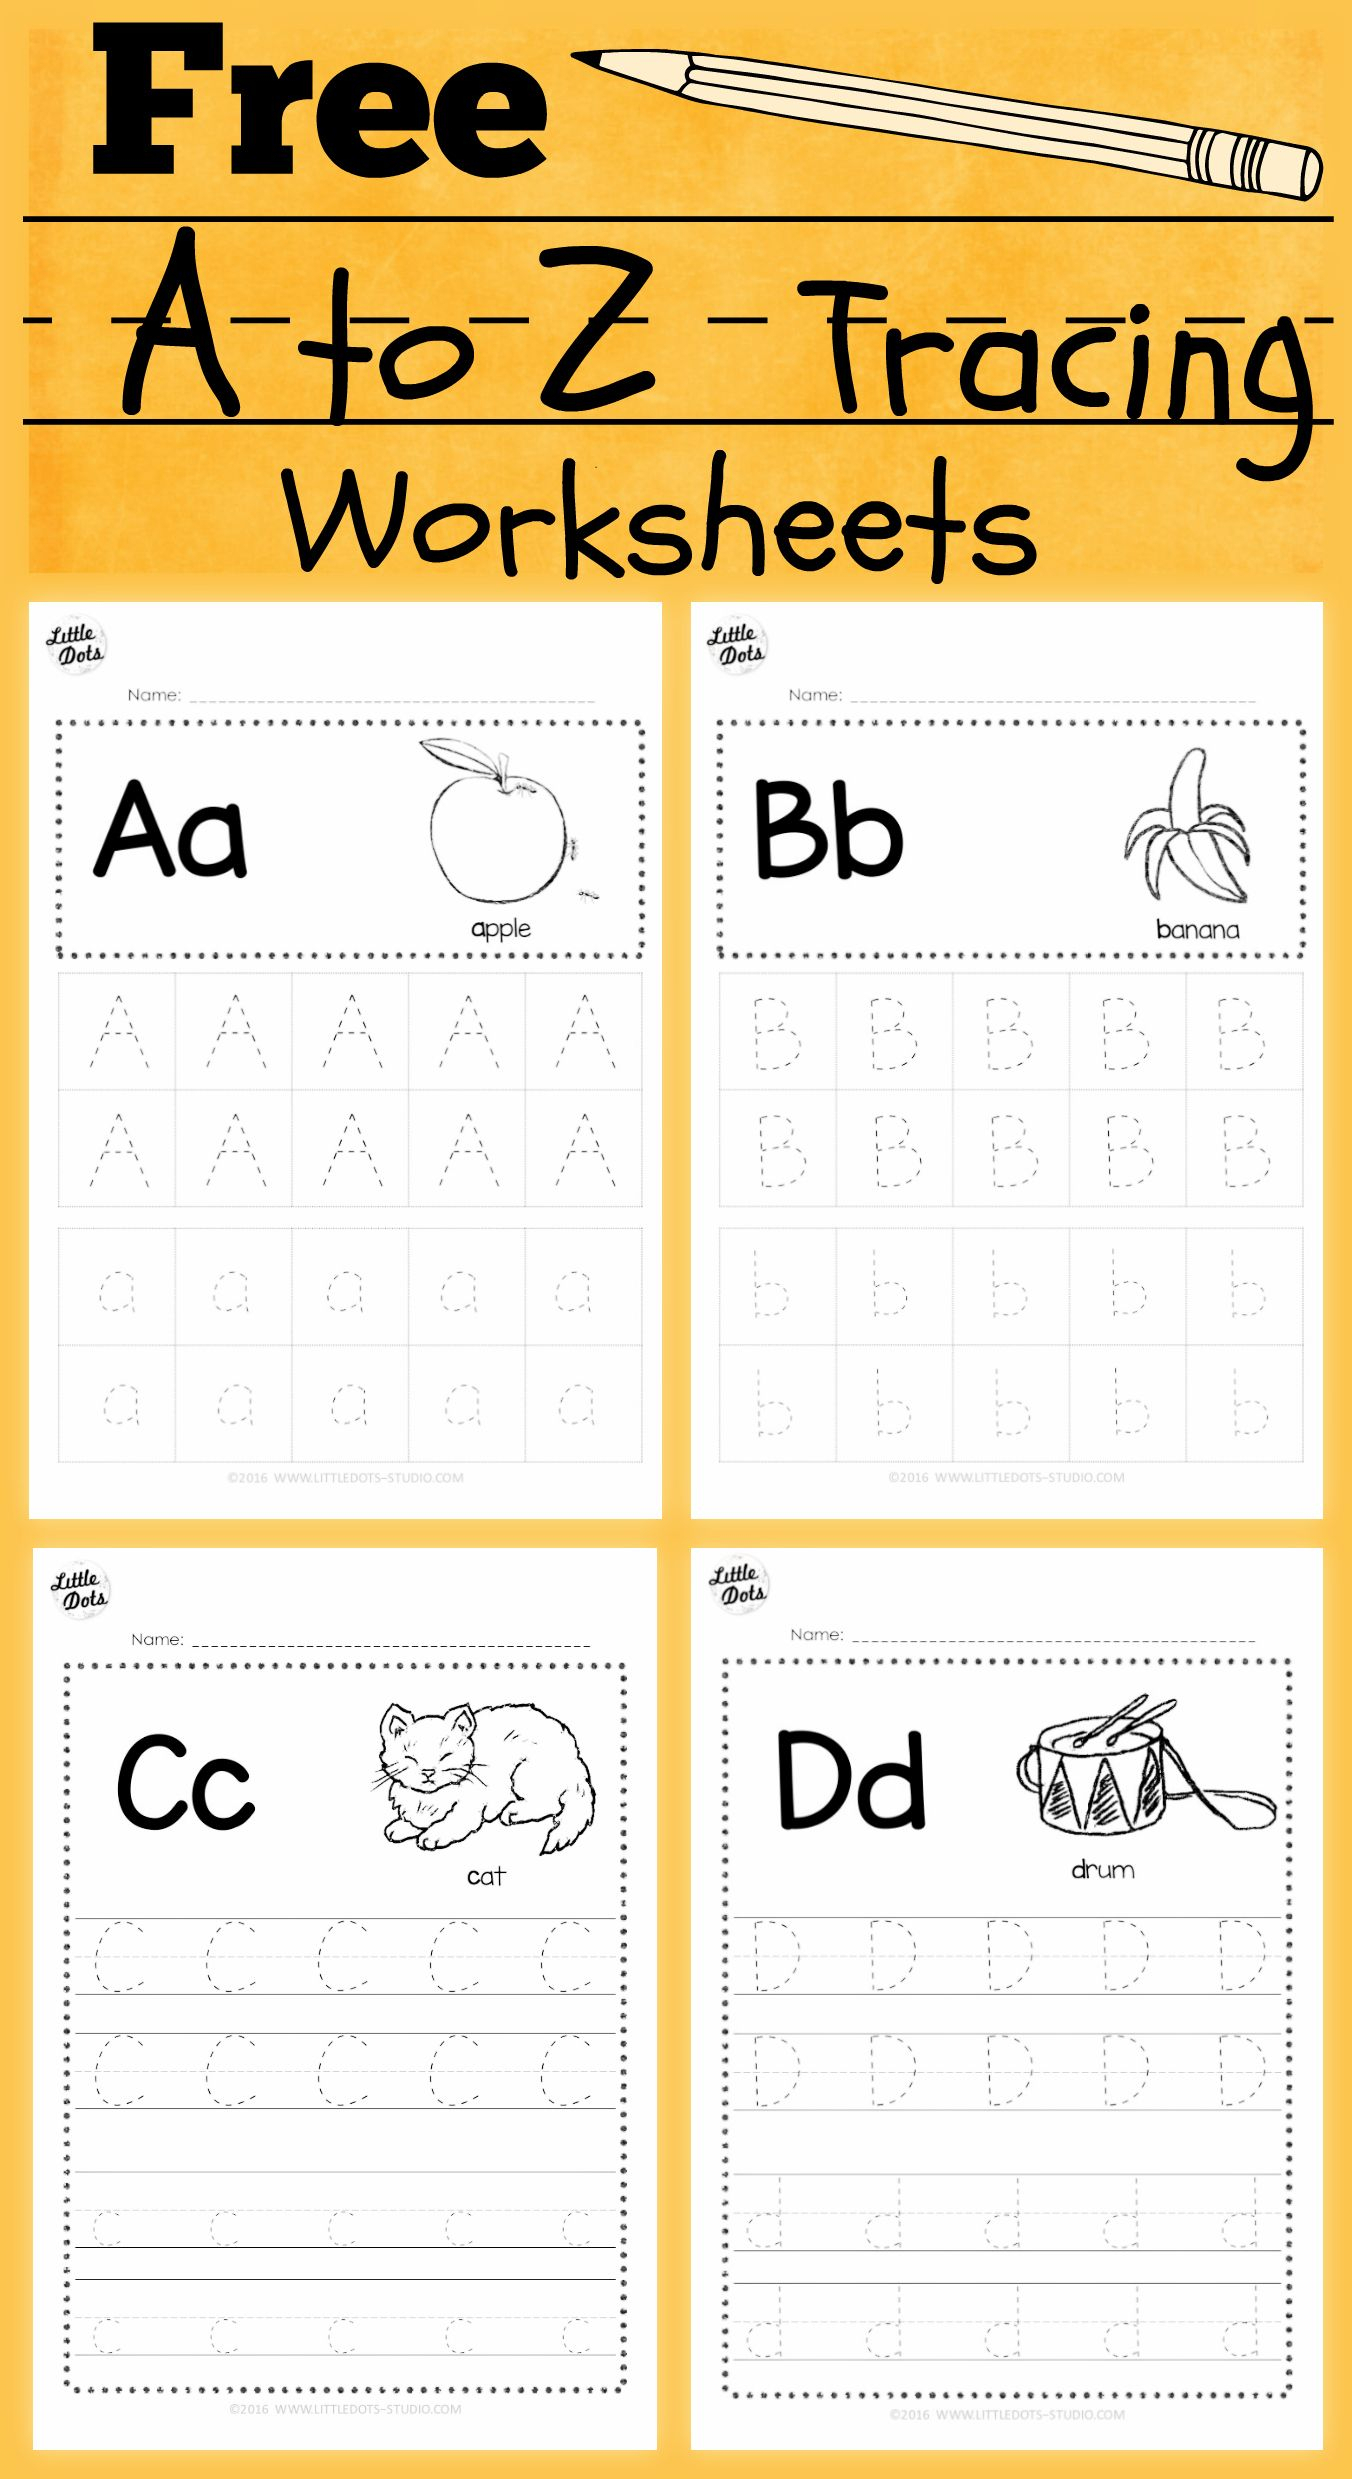 Download Free Alphabet Tracing Worksheets For Letter A To Z within Tracing Letters Font Free